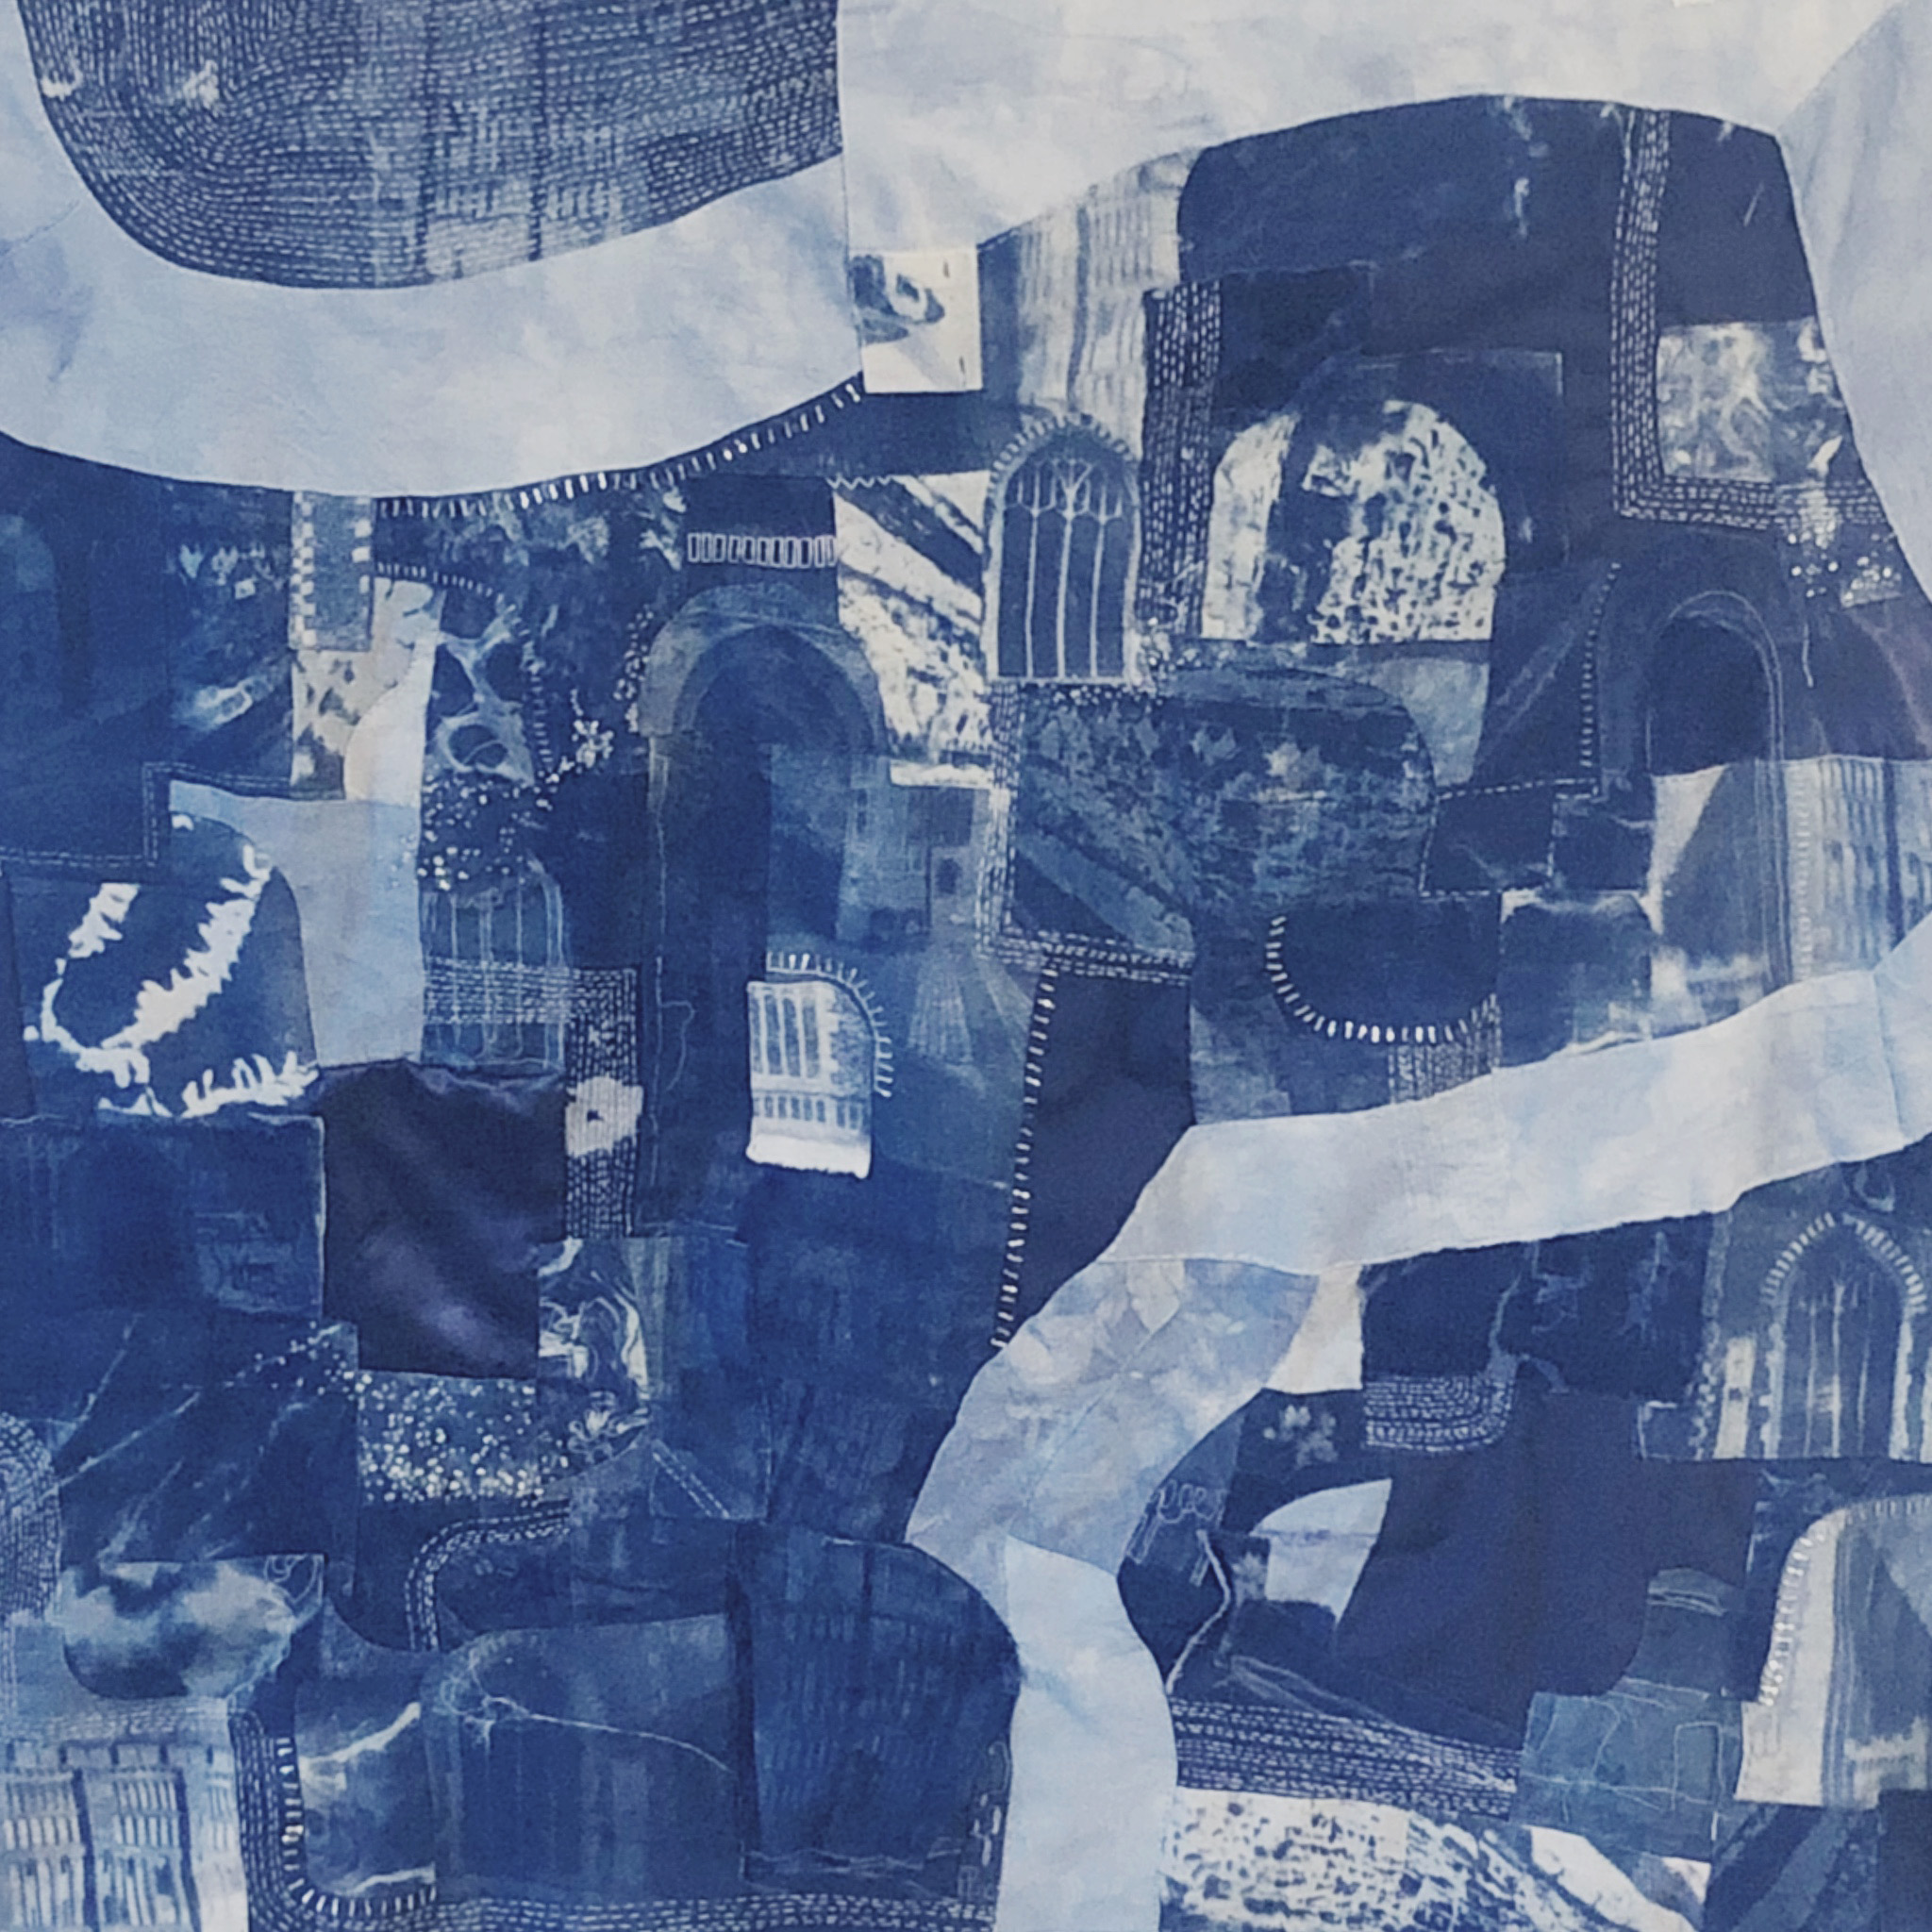 BA Illustration wall hanging made from different shades of blue fabric pieces produced through cyanotype, hand stitched together to create a map composition of Norwich city highlighting some of the Haunted hotspots.